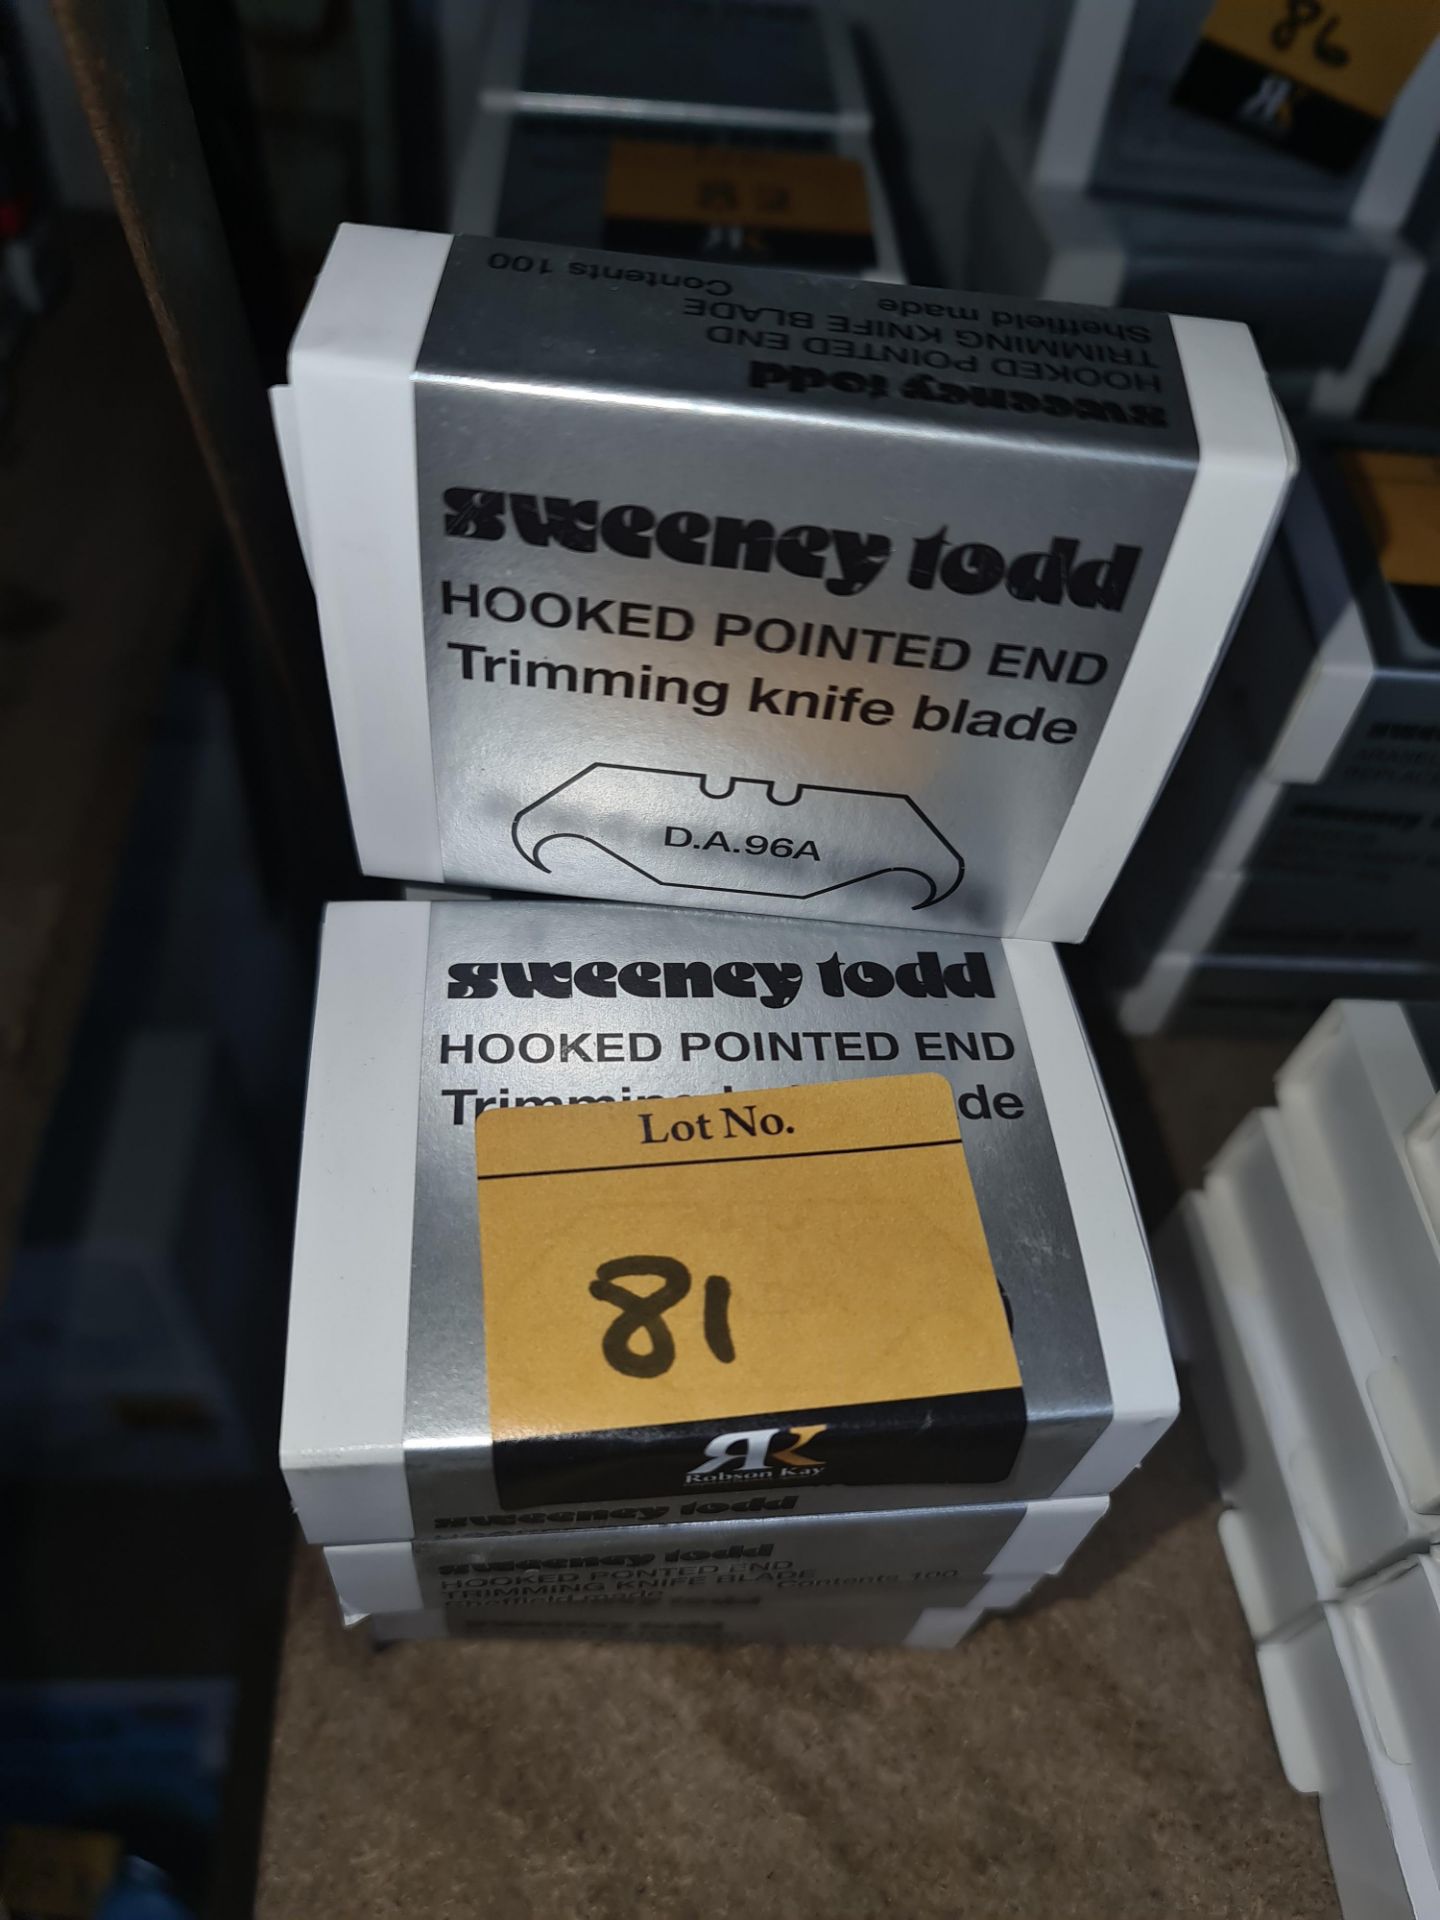 9 boxes of Sweeney Todd hooked pointed end trimming knife blades, product code DA96ALots 31 - 328